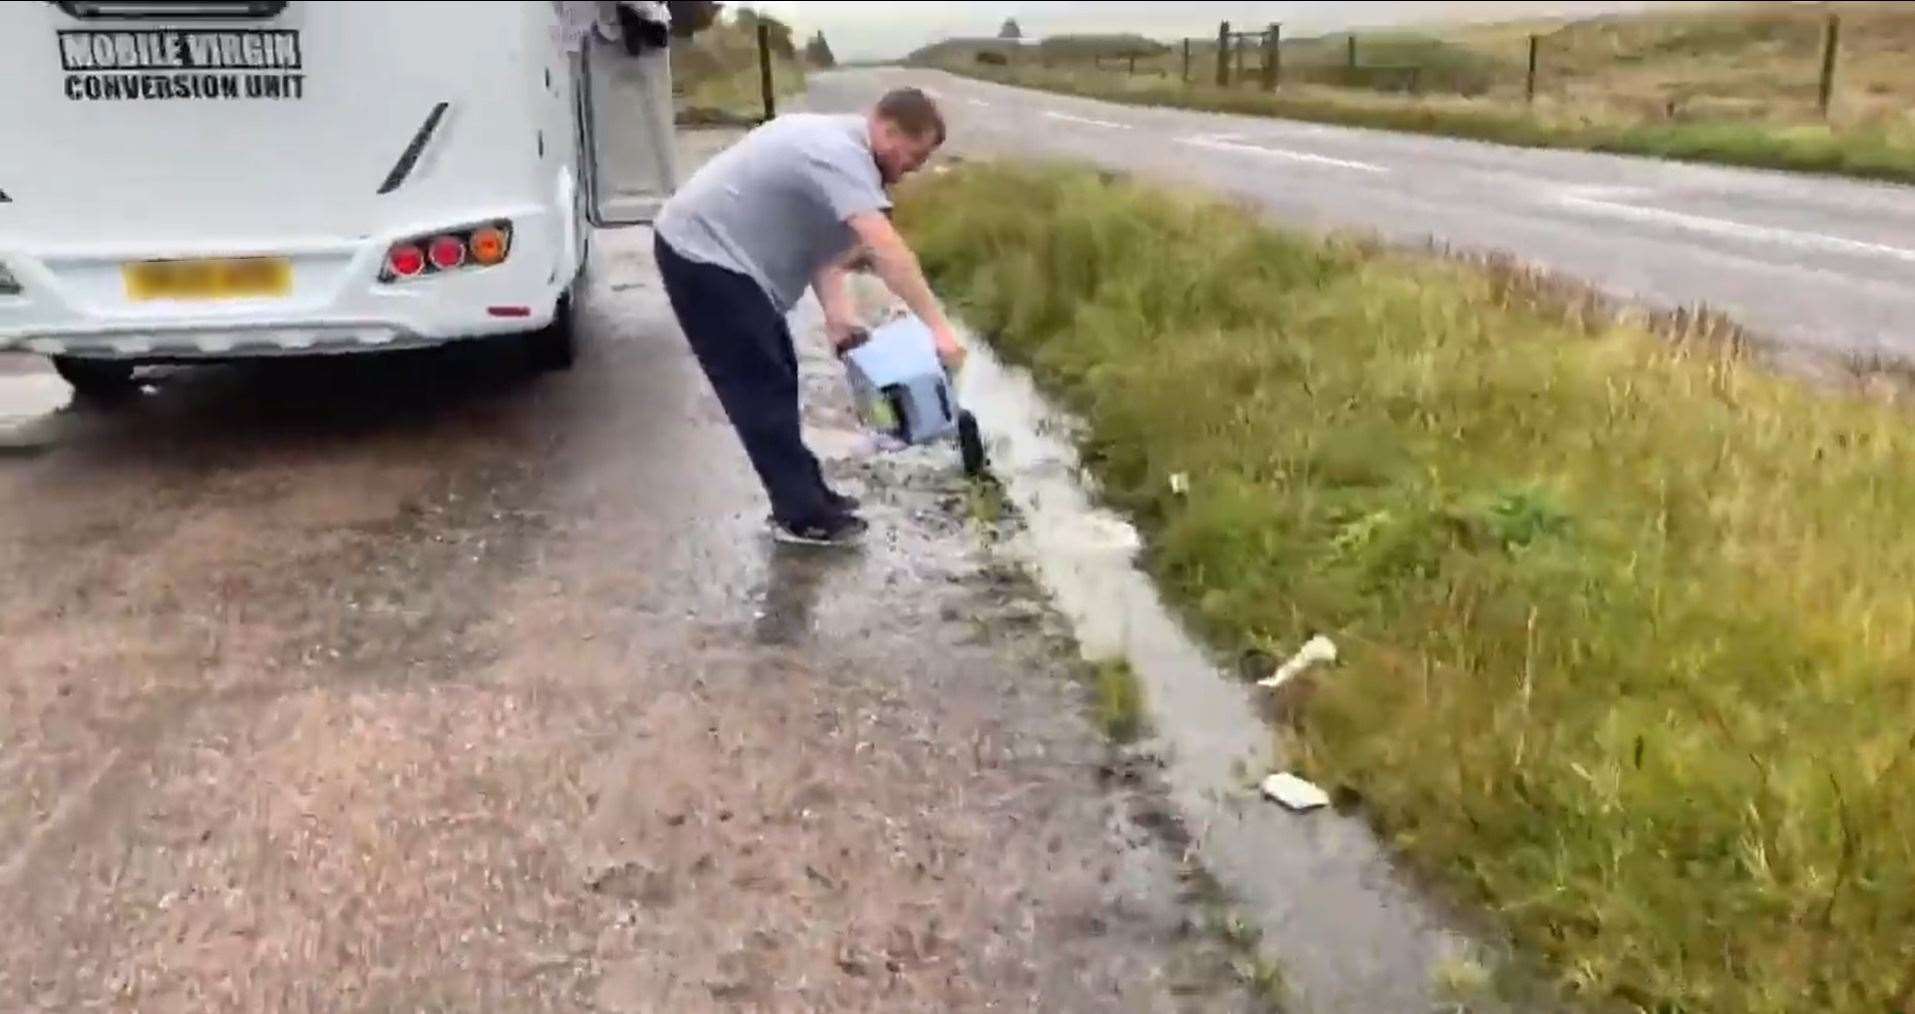 This still taken from the video shows one of the motorhome occupants upending the chemical toilet cassette.